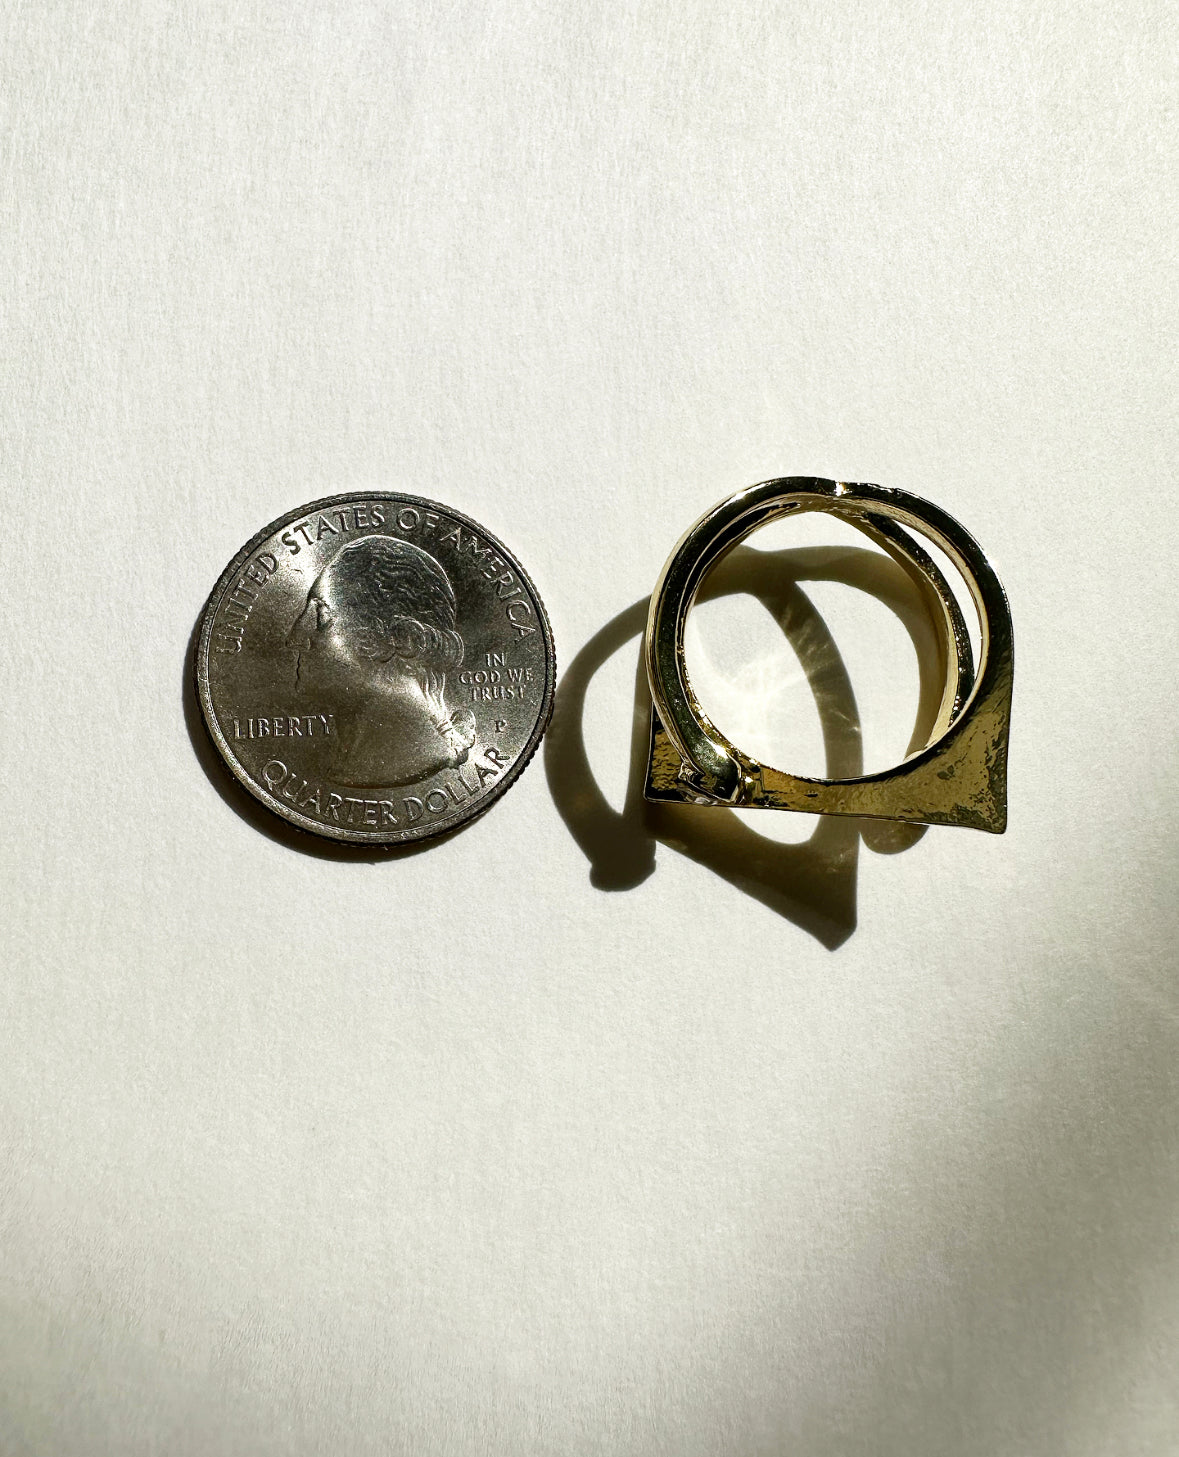 So Maude Ring next to a quarter for size comparison.